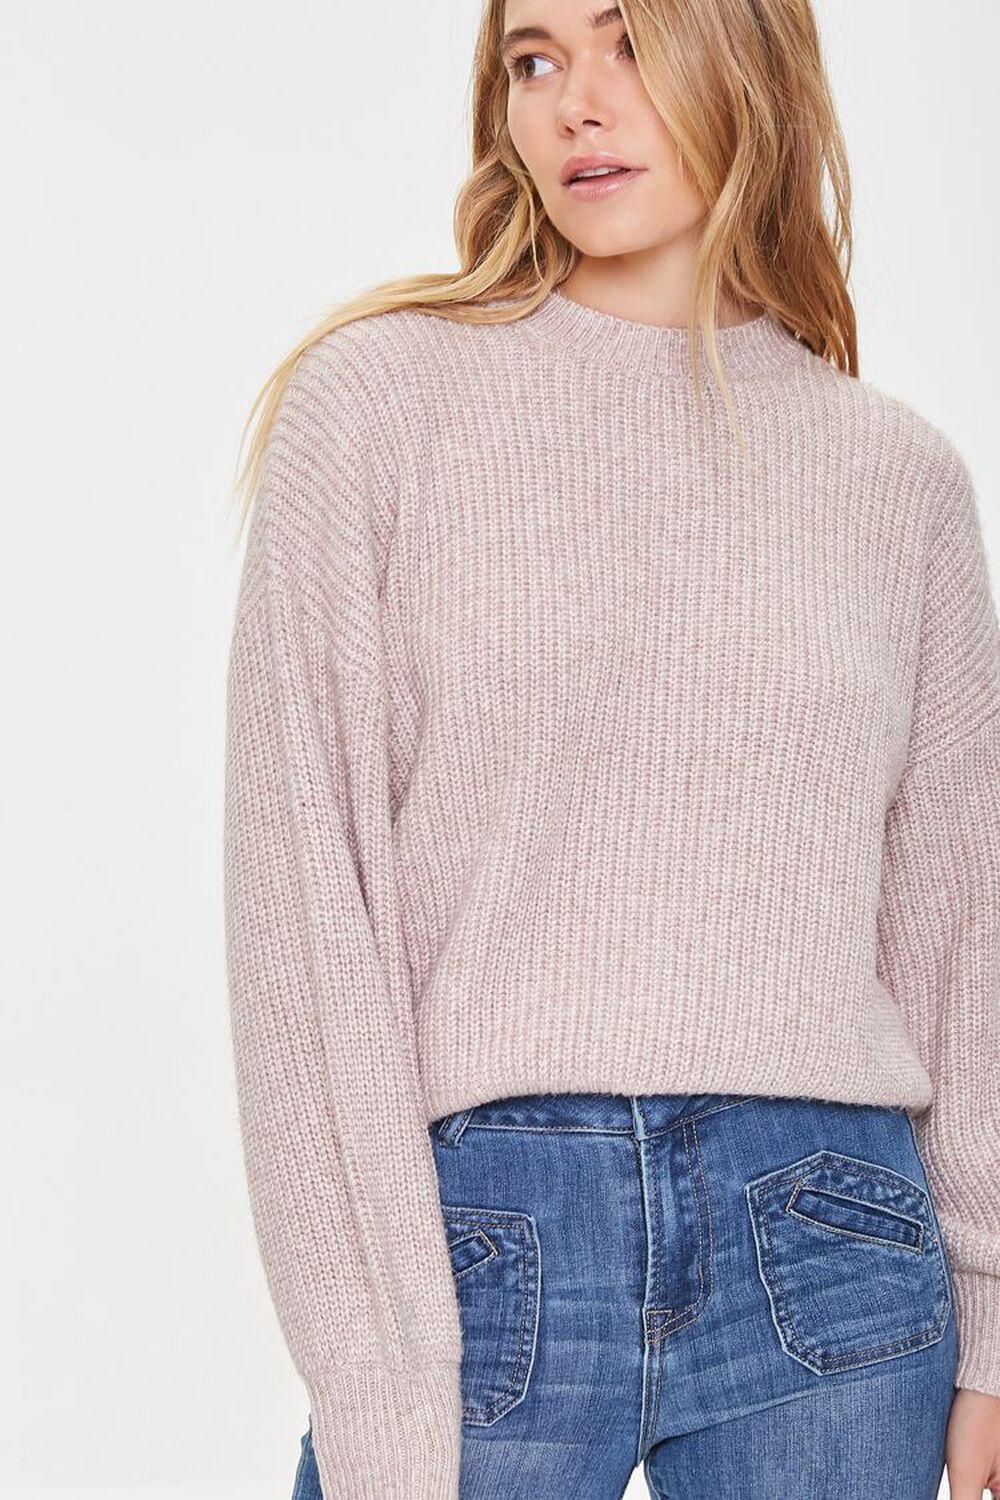 Purl Knit Drop-Sleeve Sweater